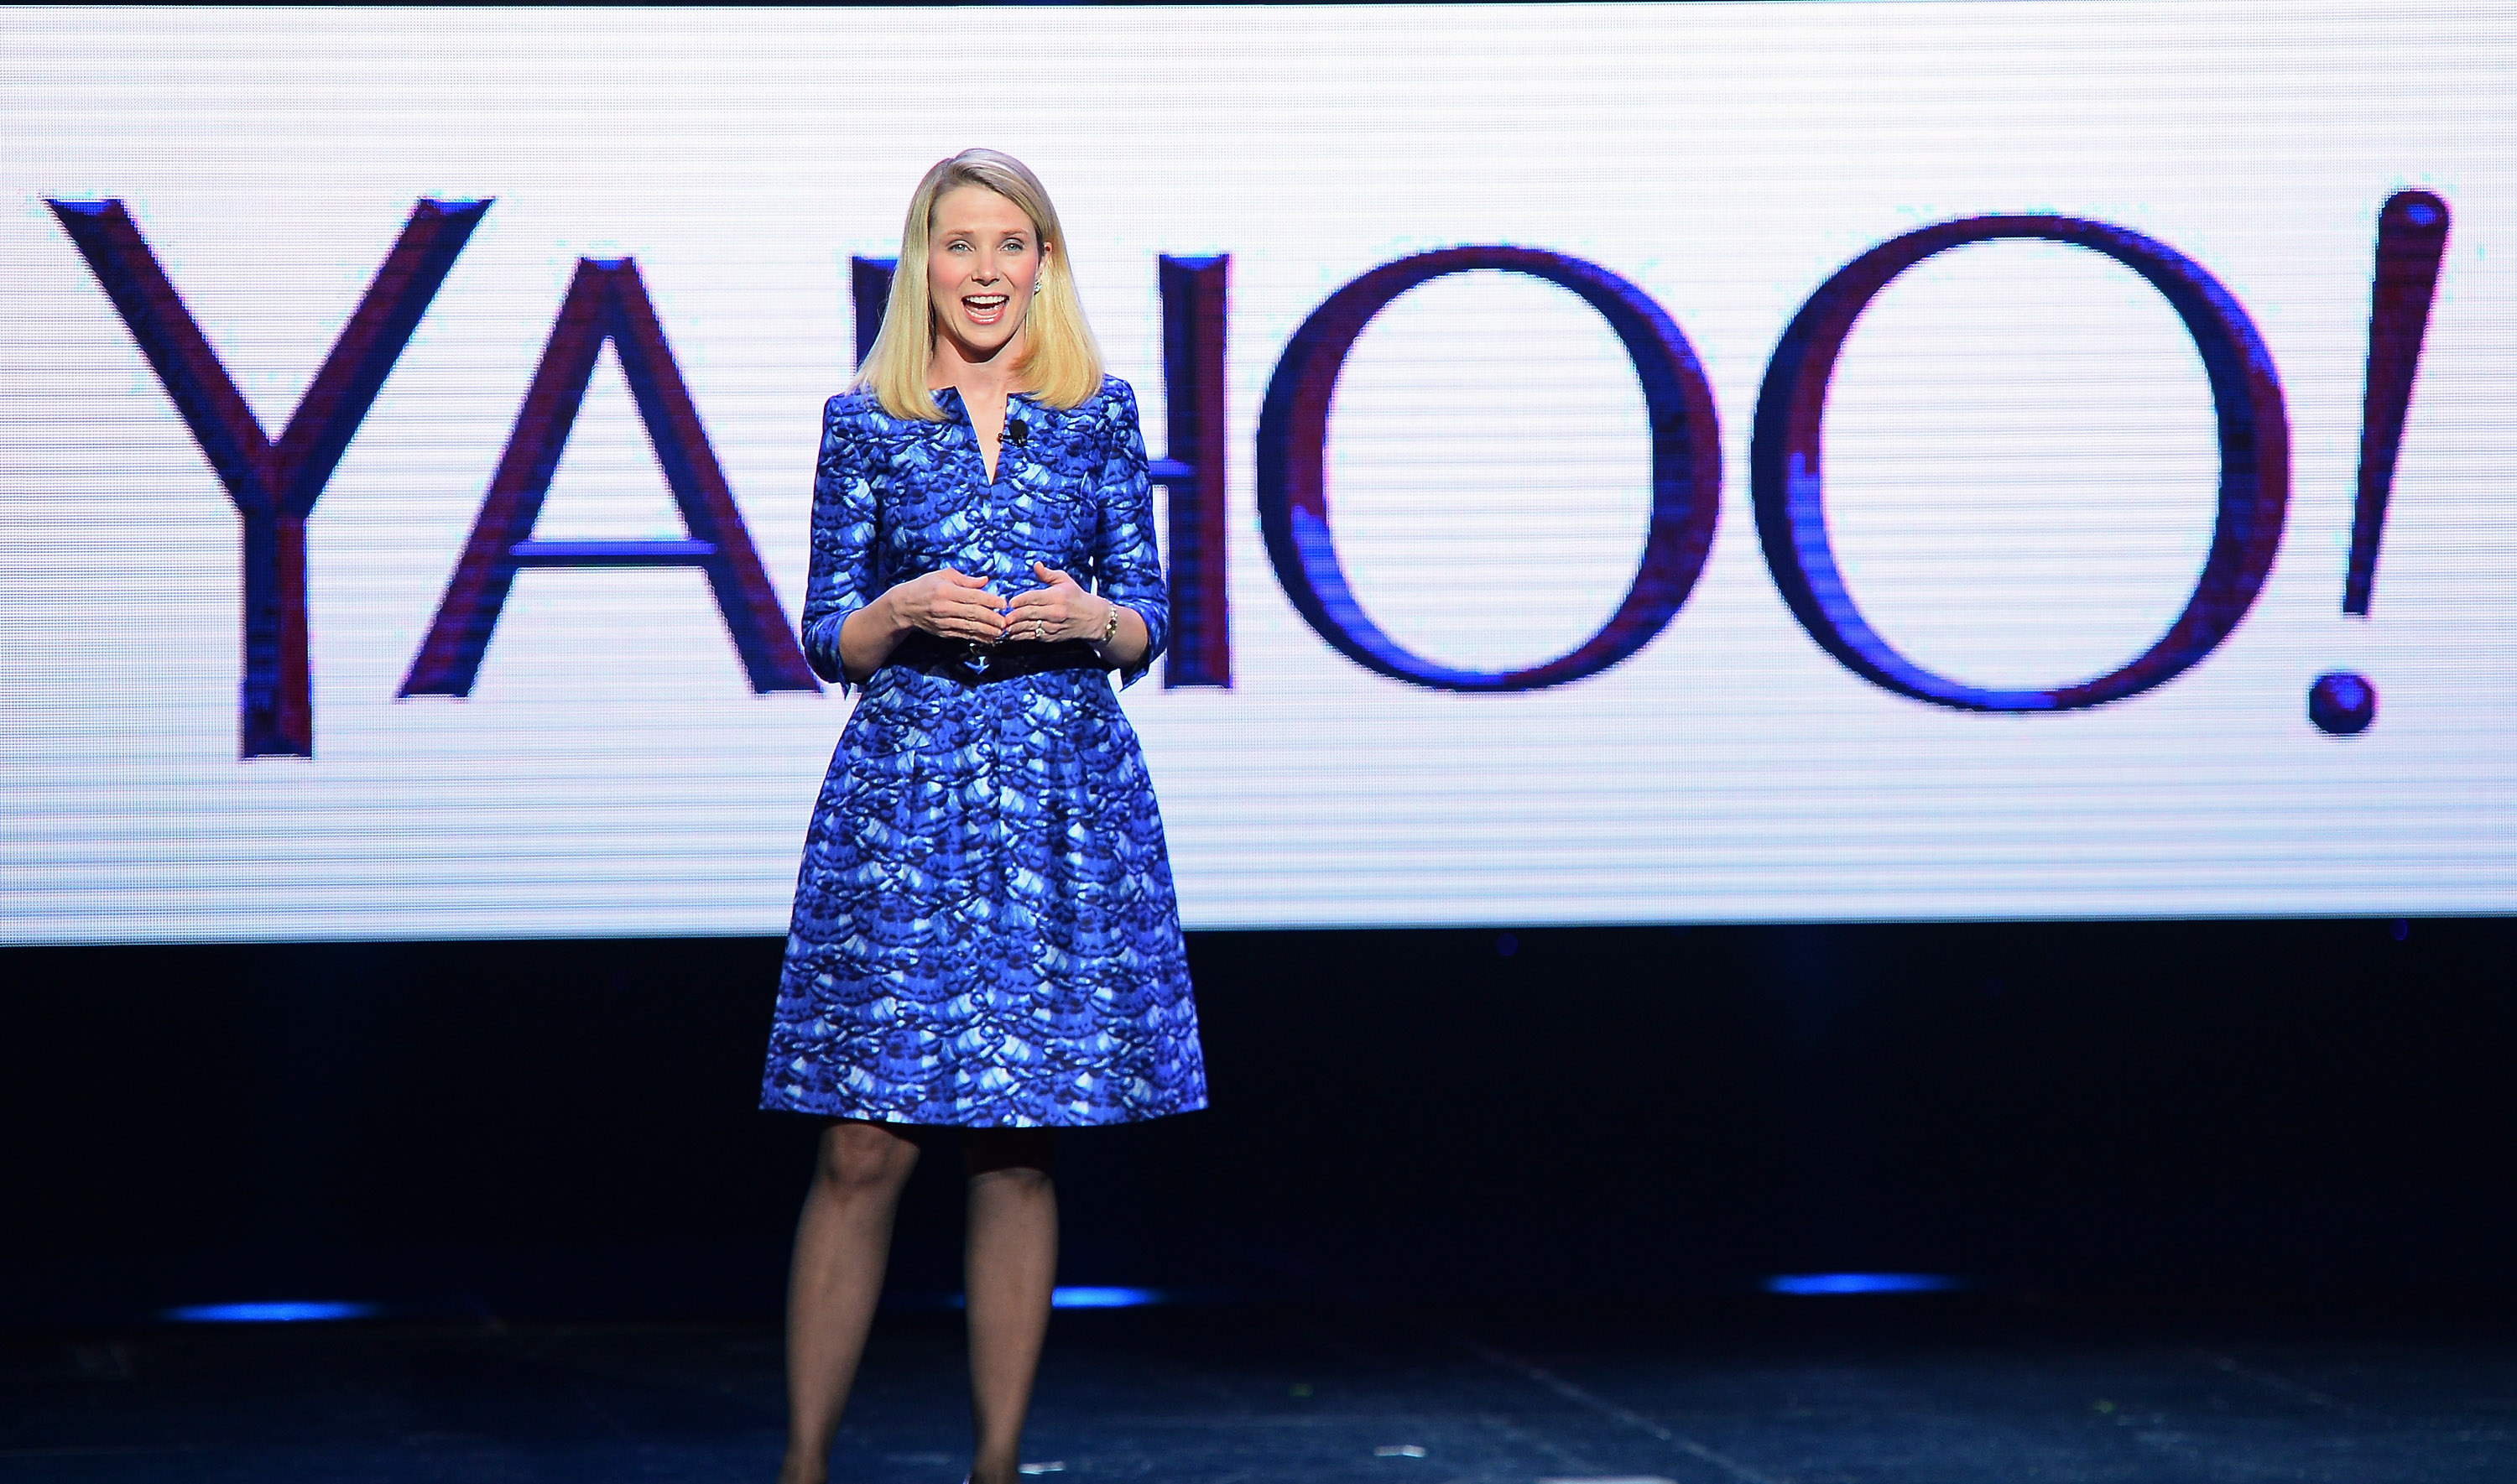 Marissa Mayer Resigns From Yahoo Following Verizon Deal To Become Oath